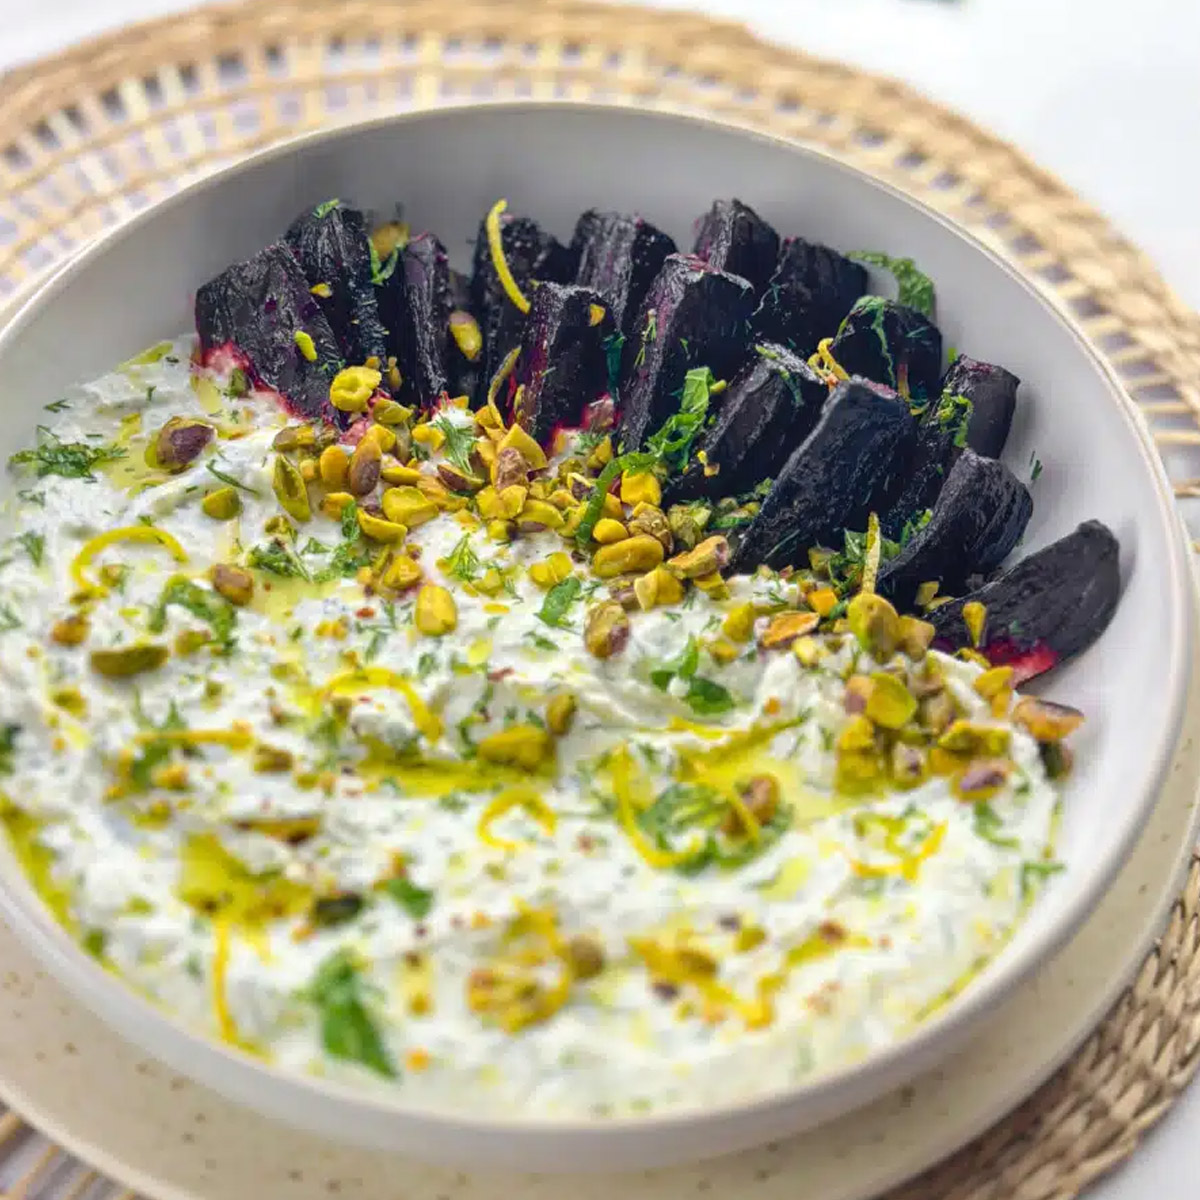 Gourmet Finishing Touches: Whipped Feta Cheese Dip and Roasted Beets